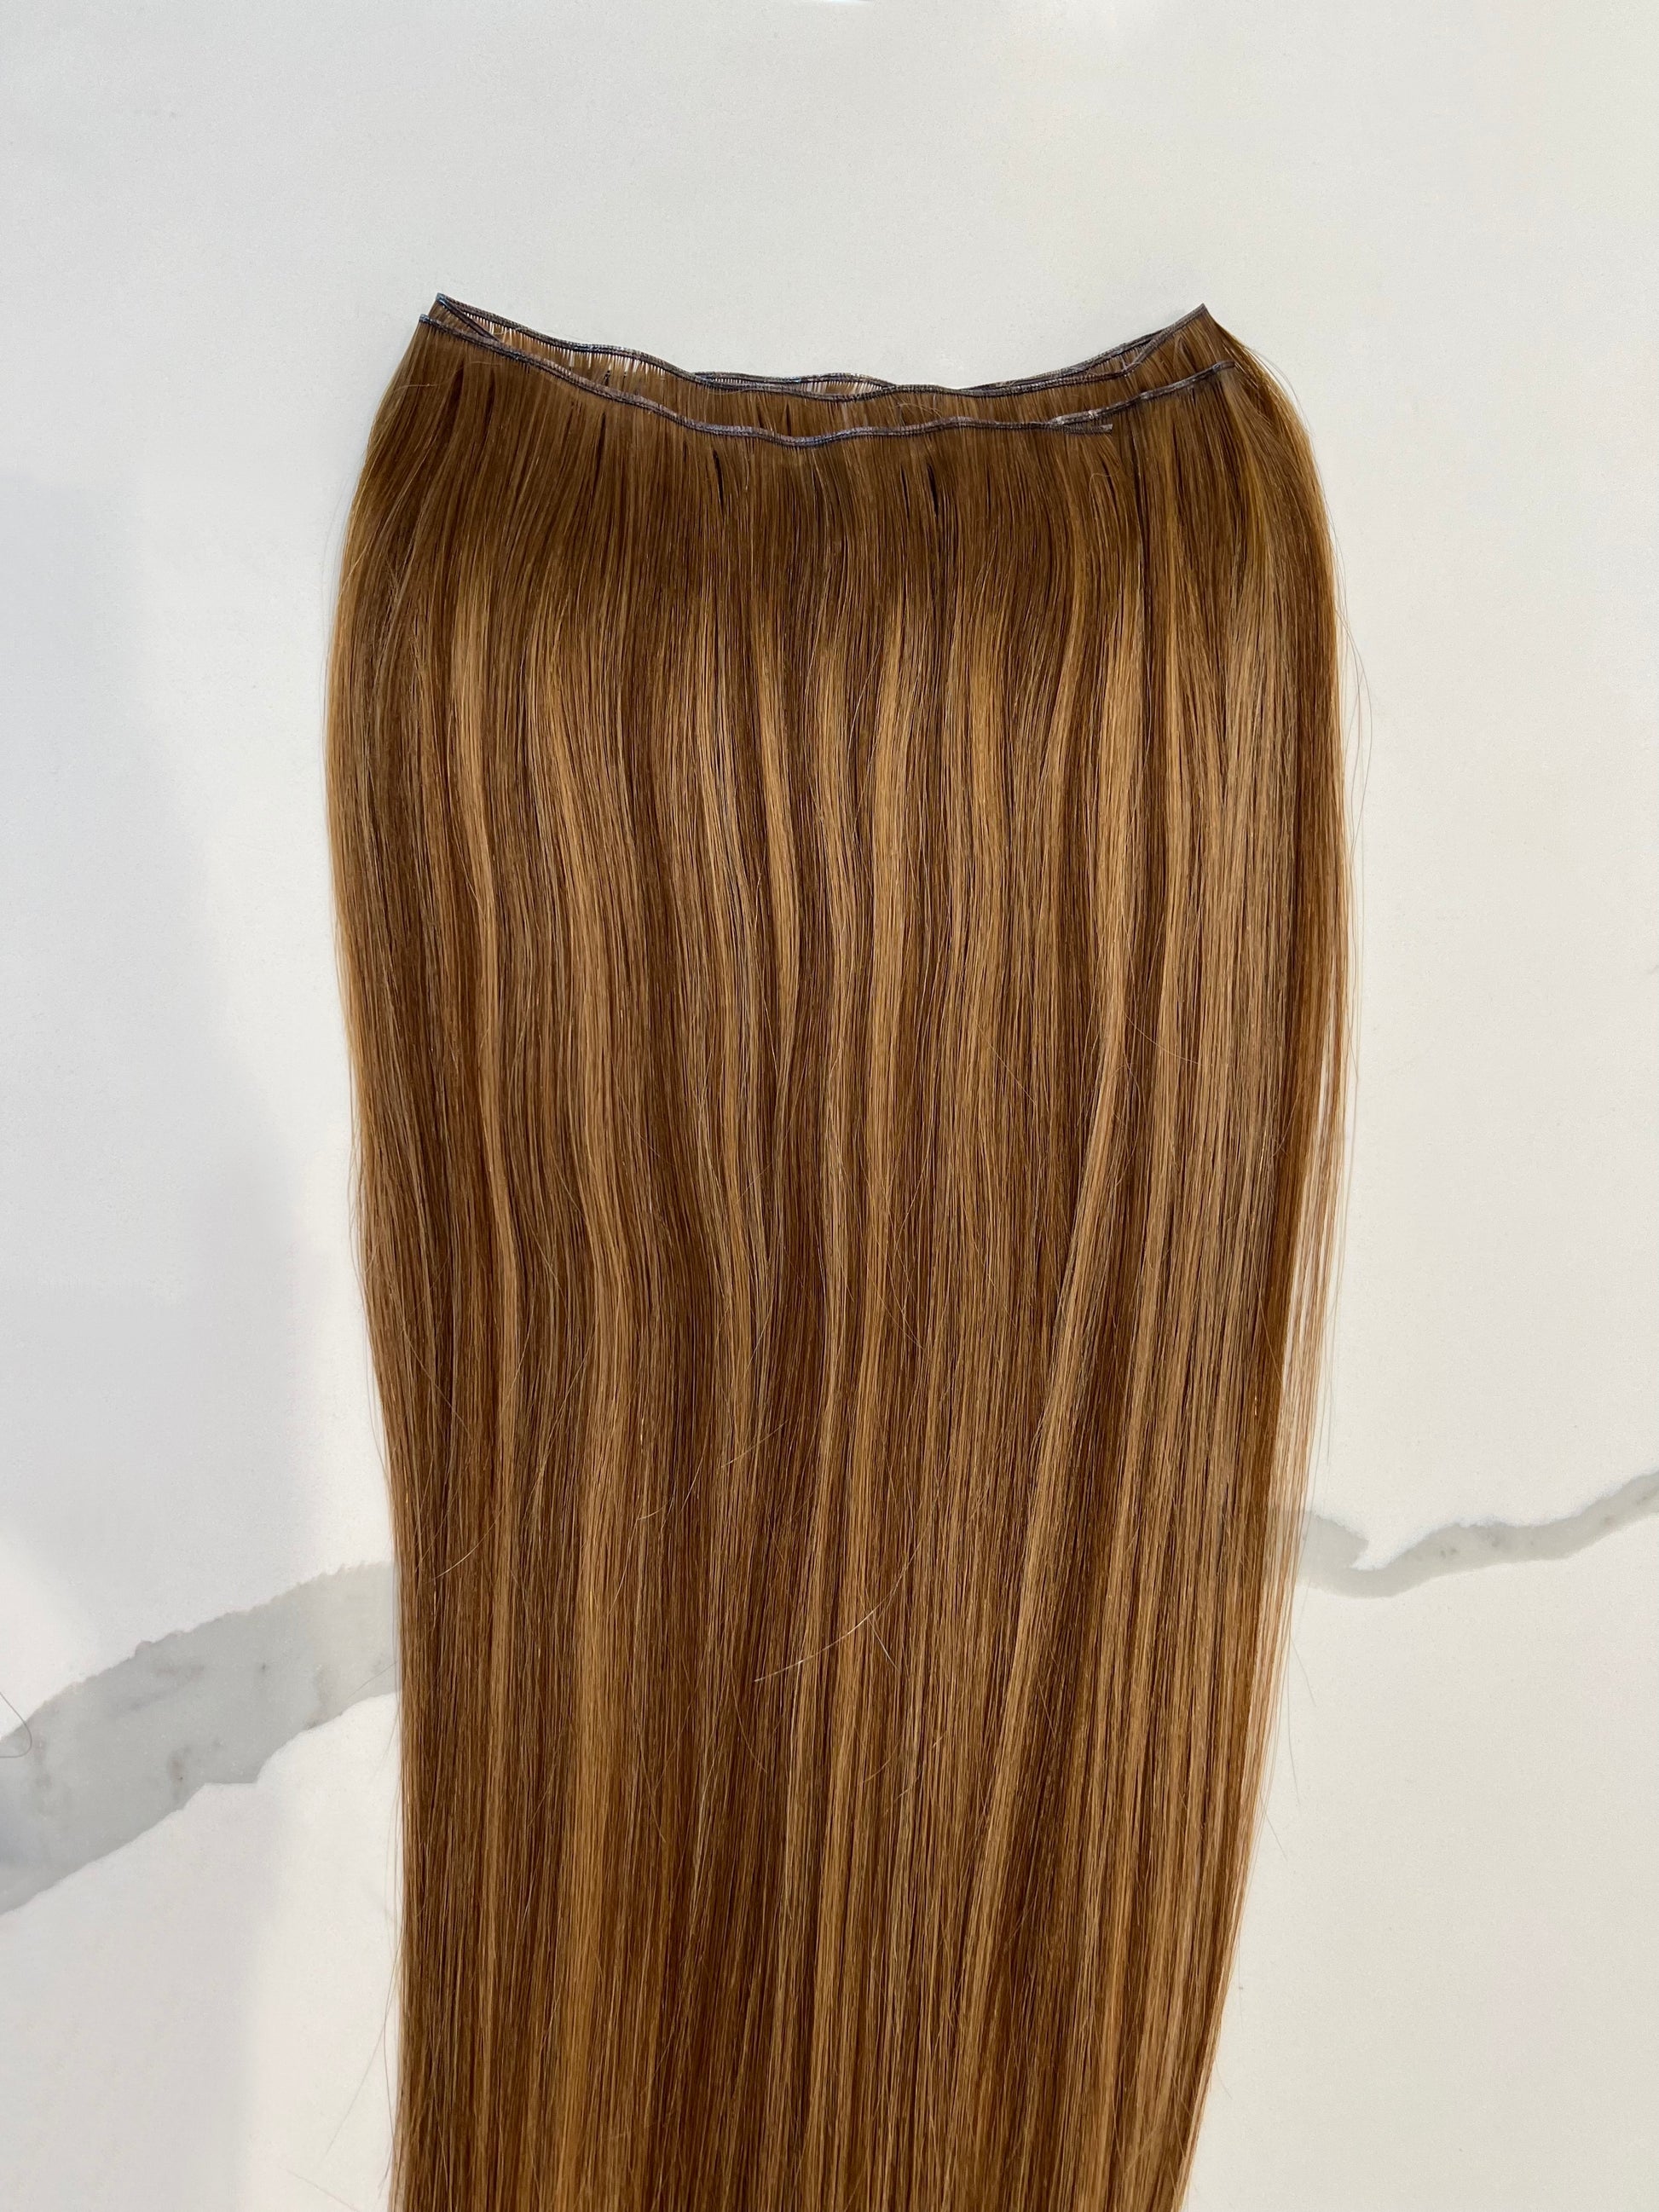 Phaneshairextensions